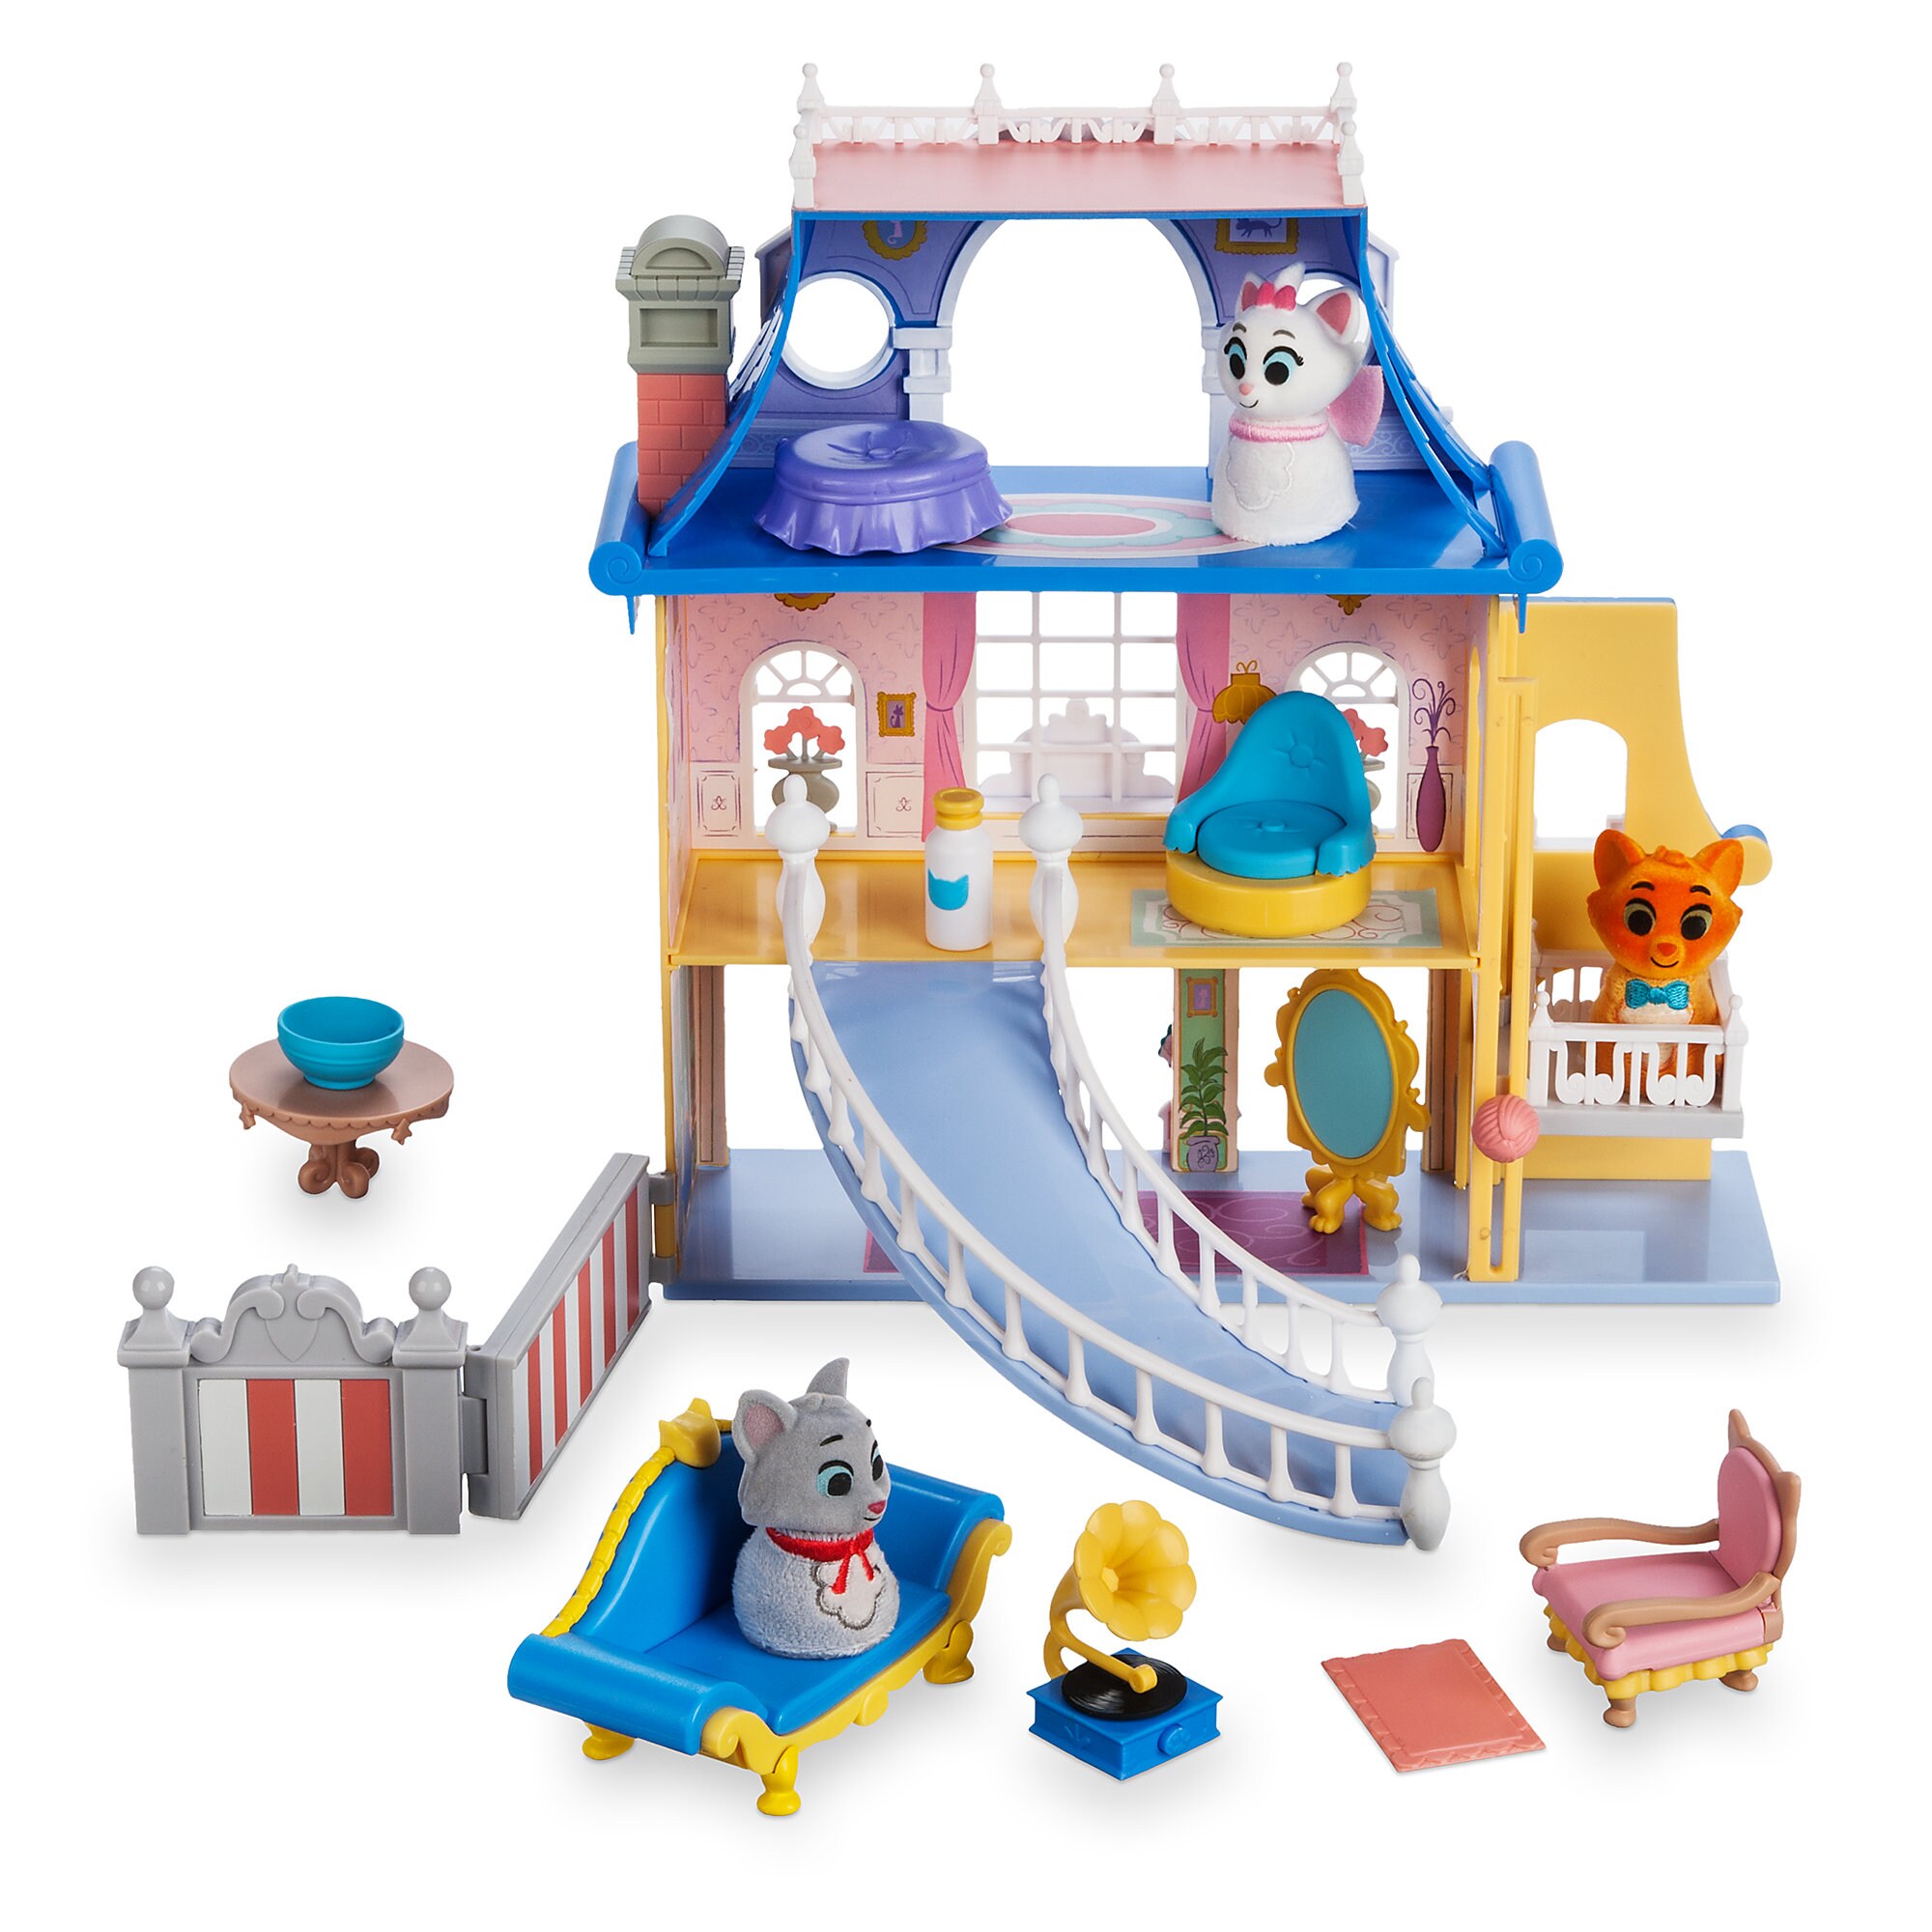 The Aristocats Mansion Deluxe Playset - Furrytale friends